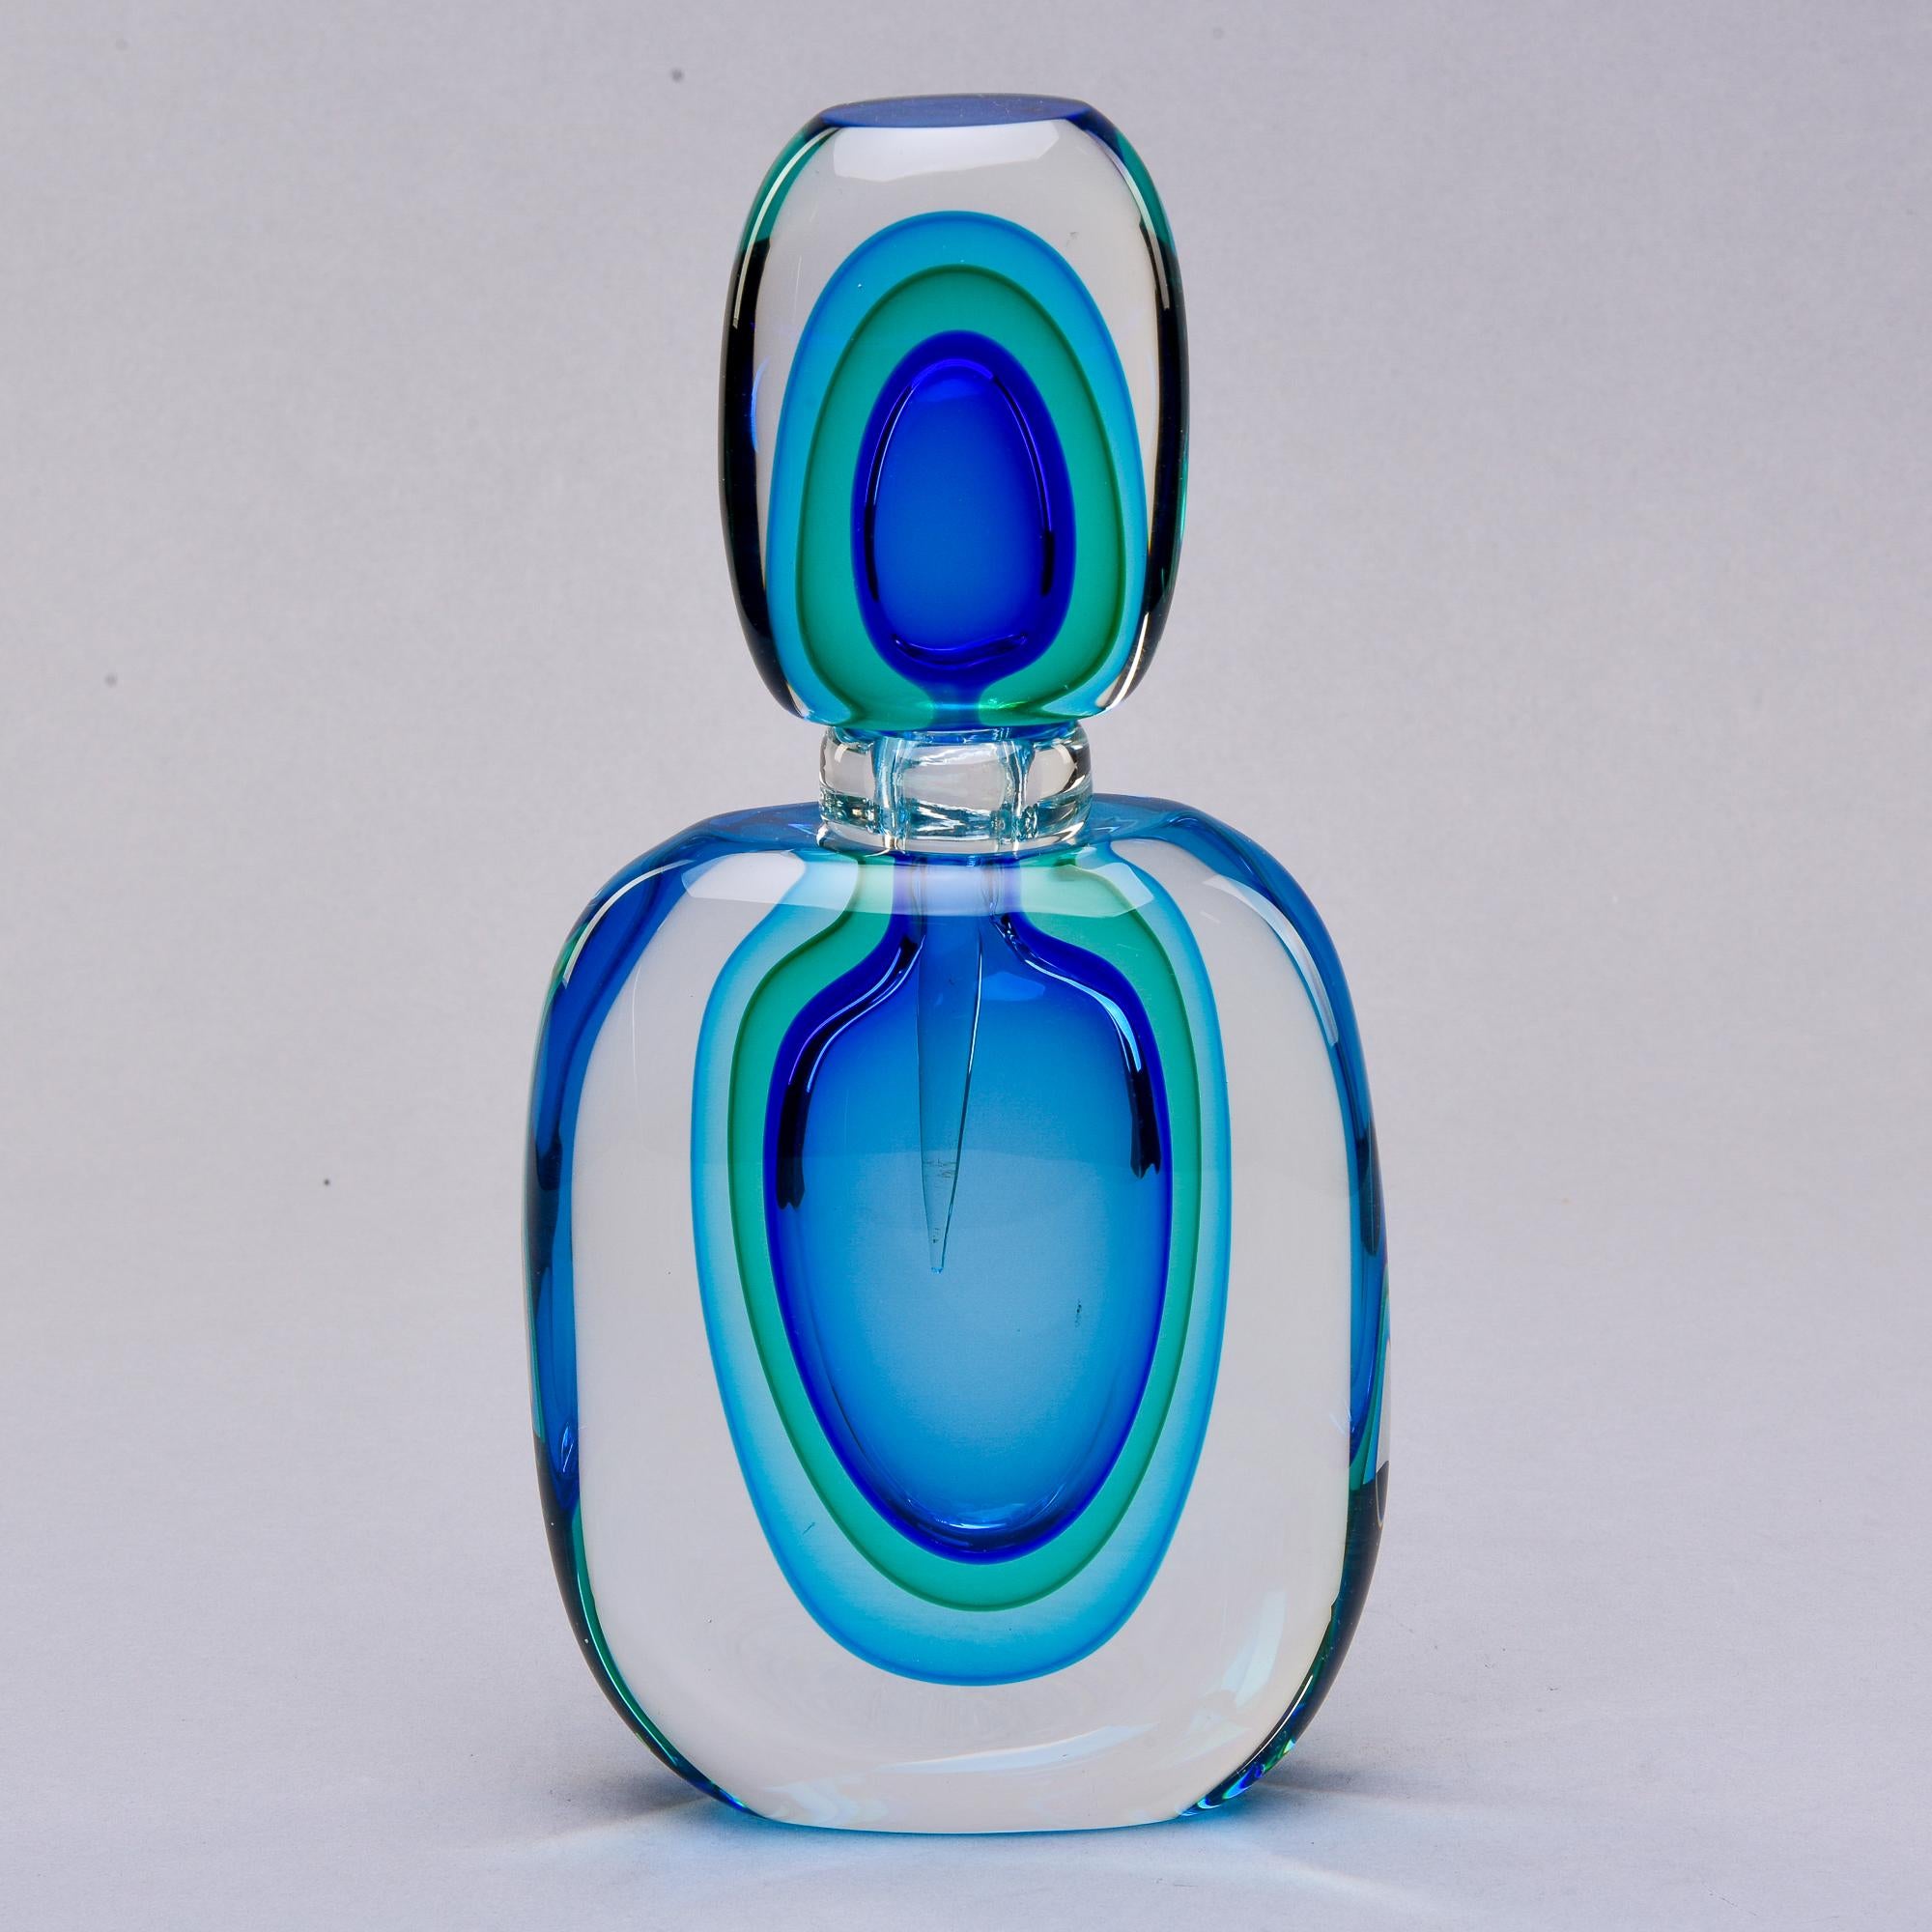 New Murano perfume bottle made of heavy, clear cased glass with suspended layers of sommerso-style glass in shades of blue and green. Top has attached perfume dabber. We have three bottles in this style and color way in varying sizes. See last photo